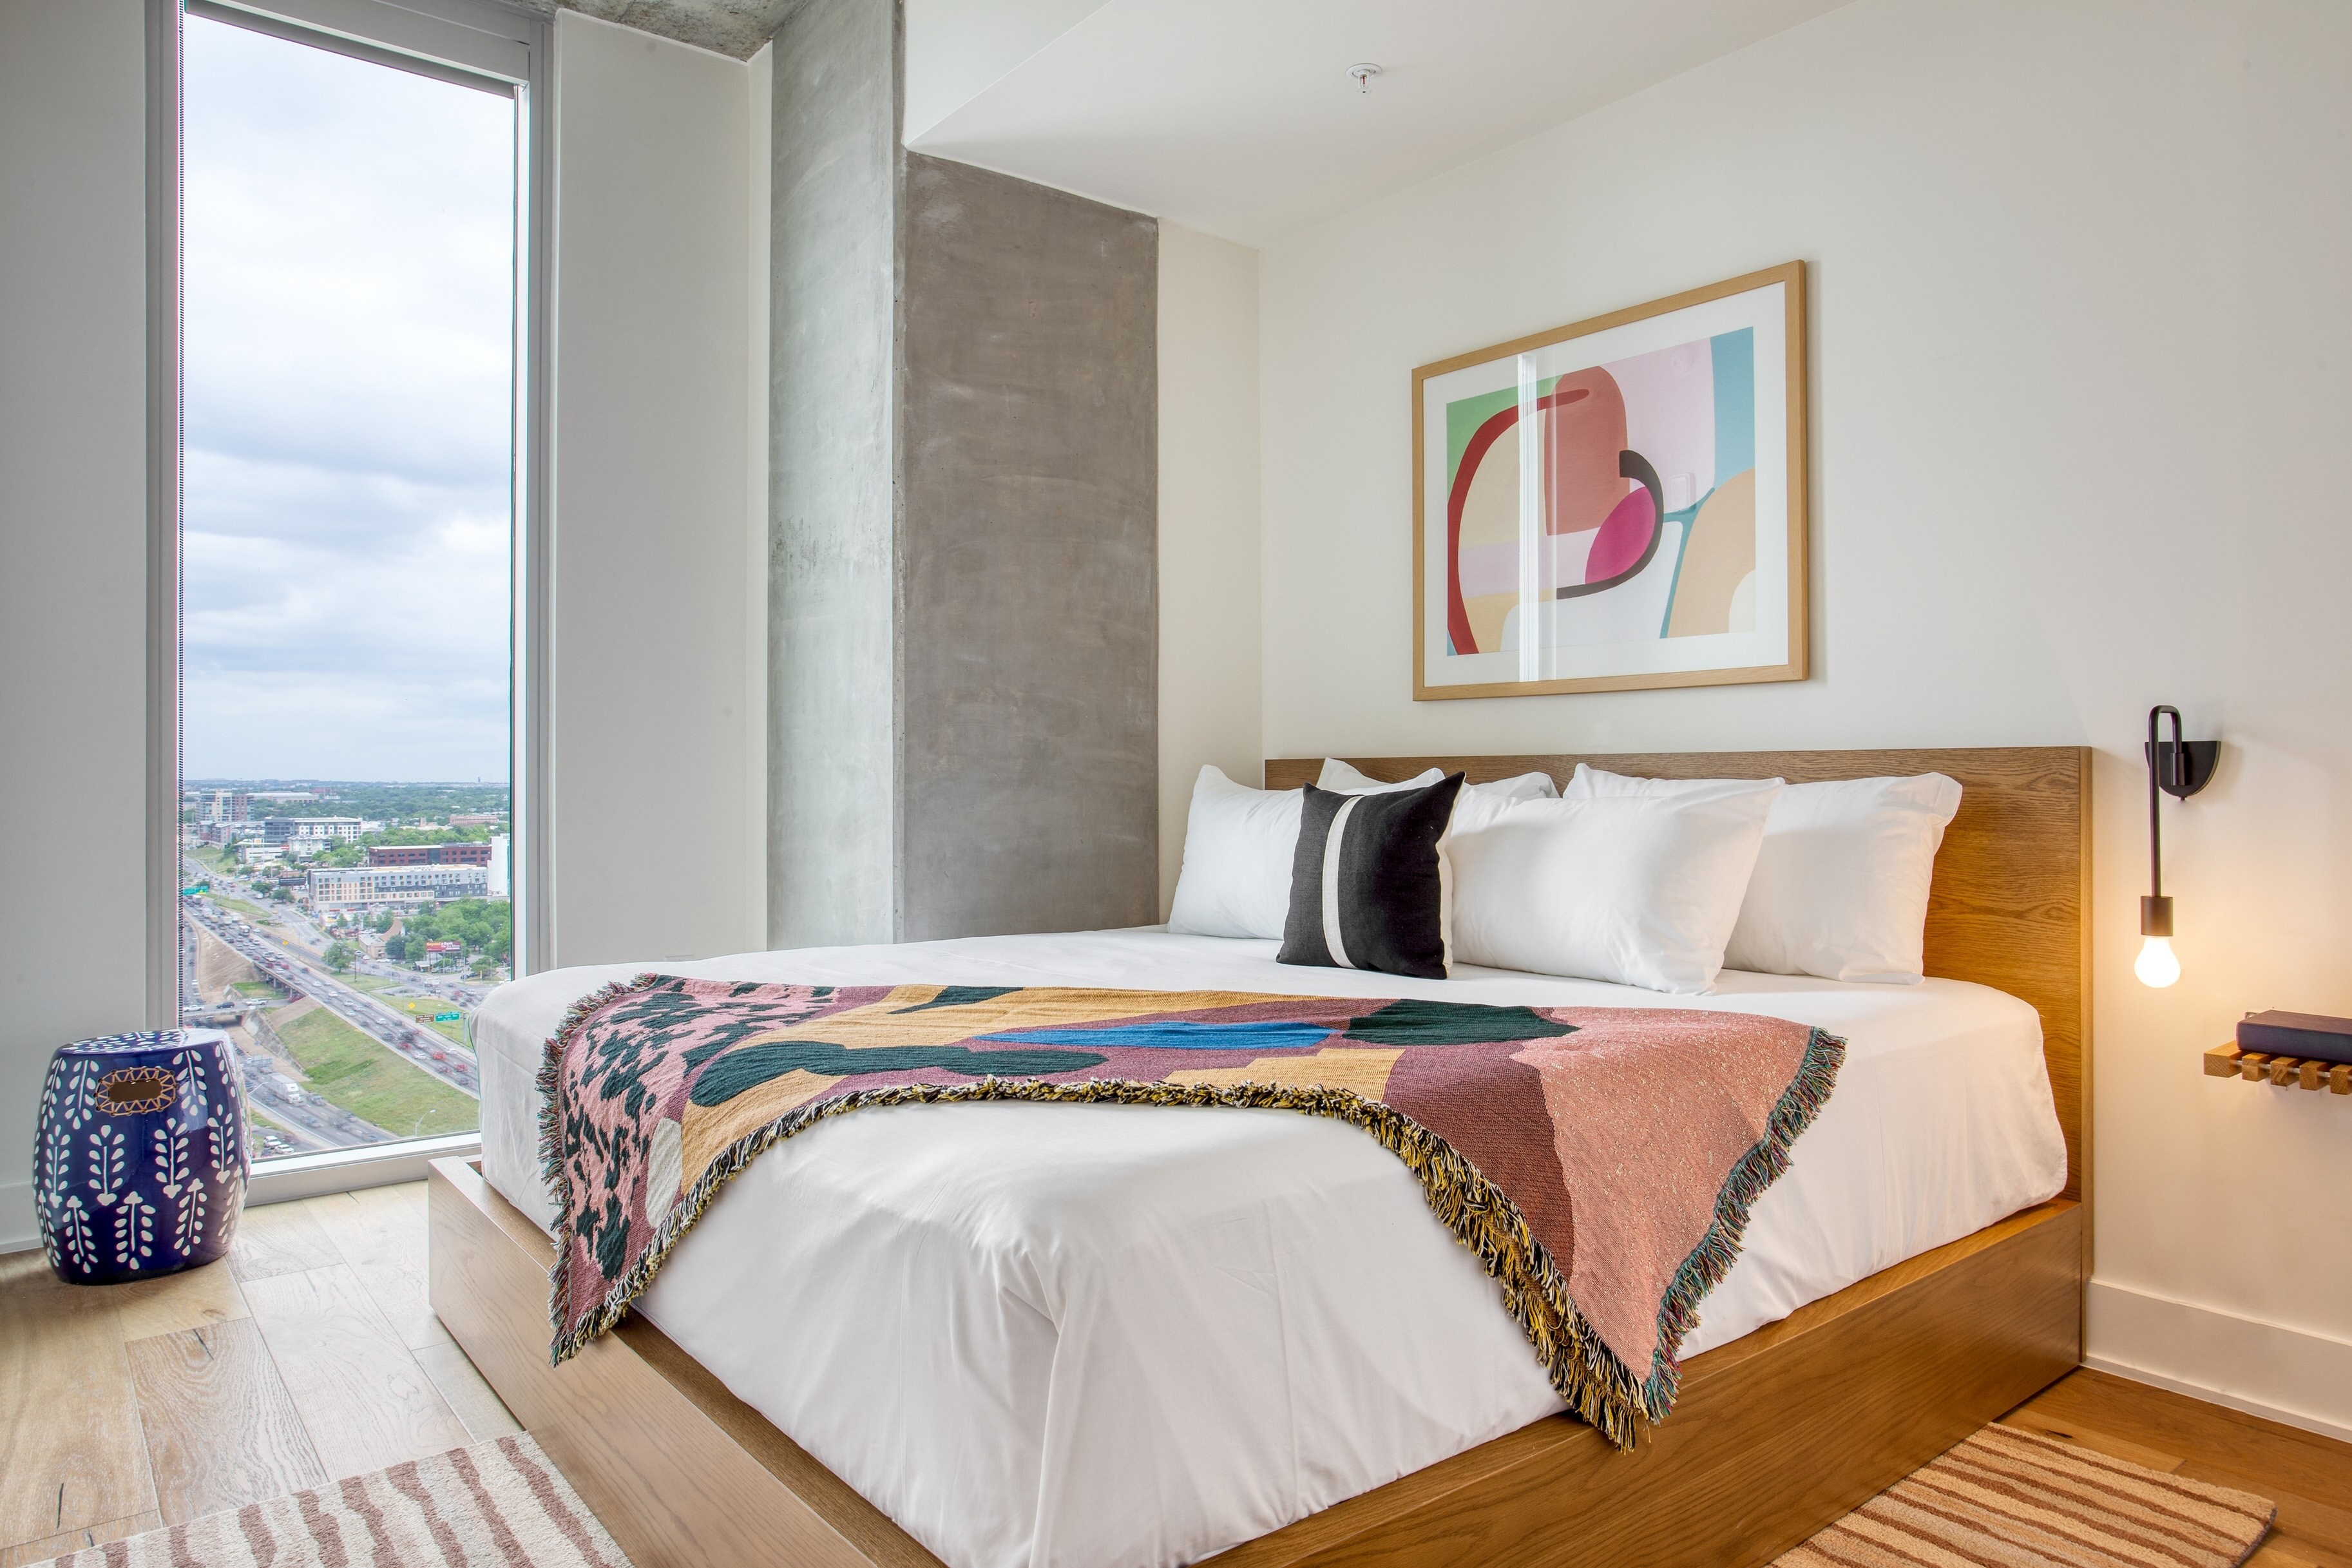 Bedroom features a king bed and floor to ceiling windows.